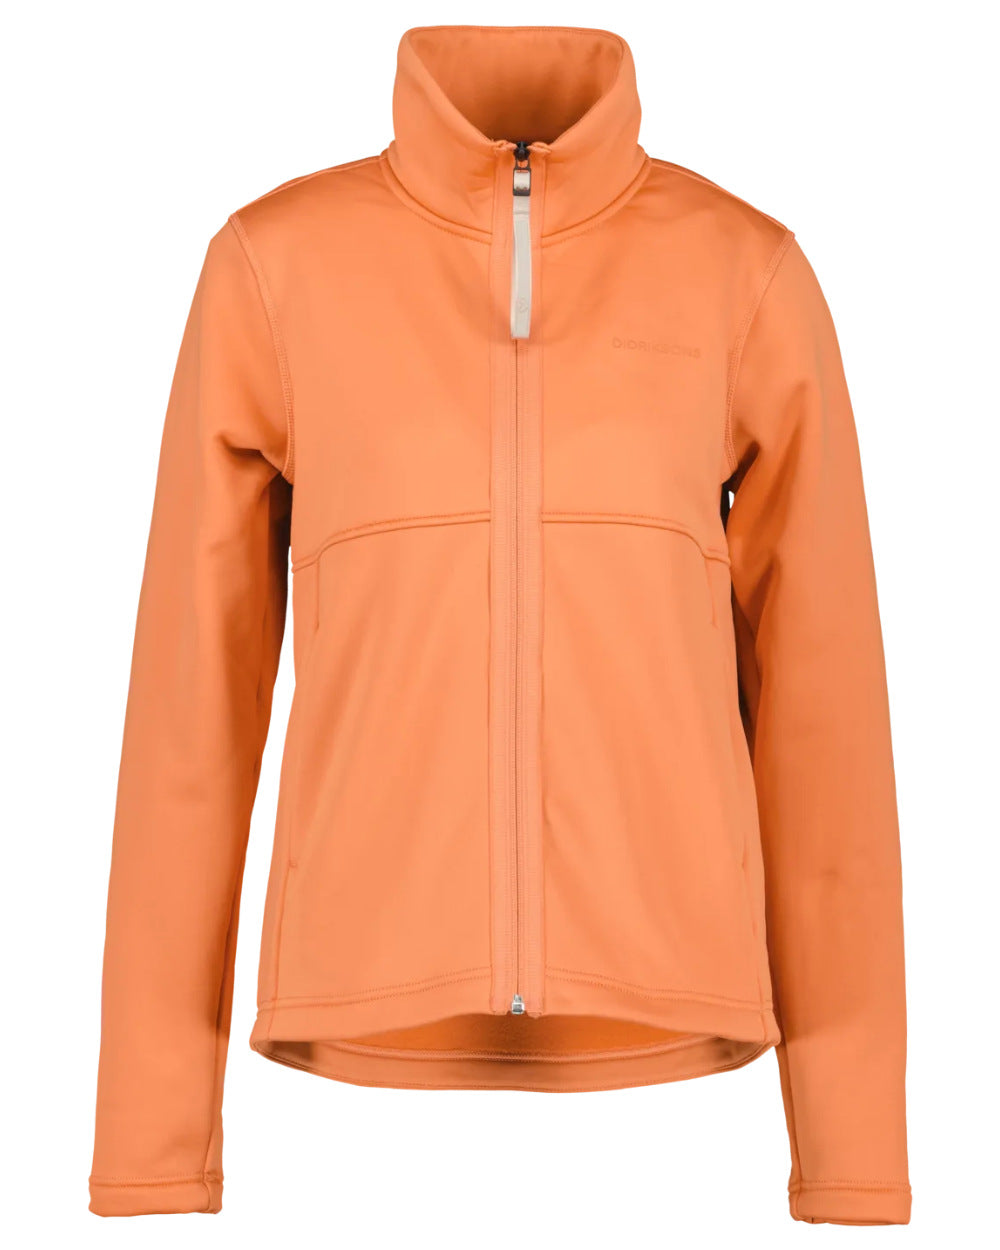 Faded Brique Coloured Didriksons Leah Womens Fullzip On A White Background 